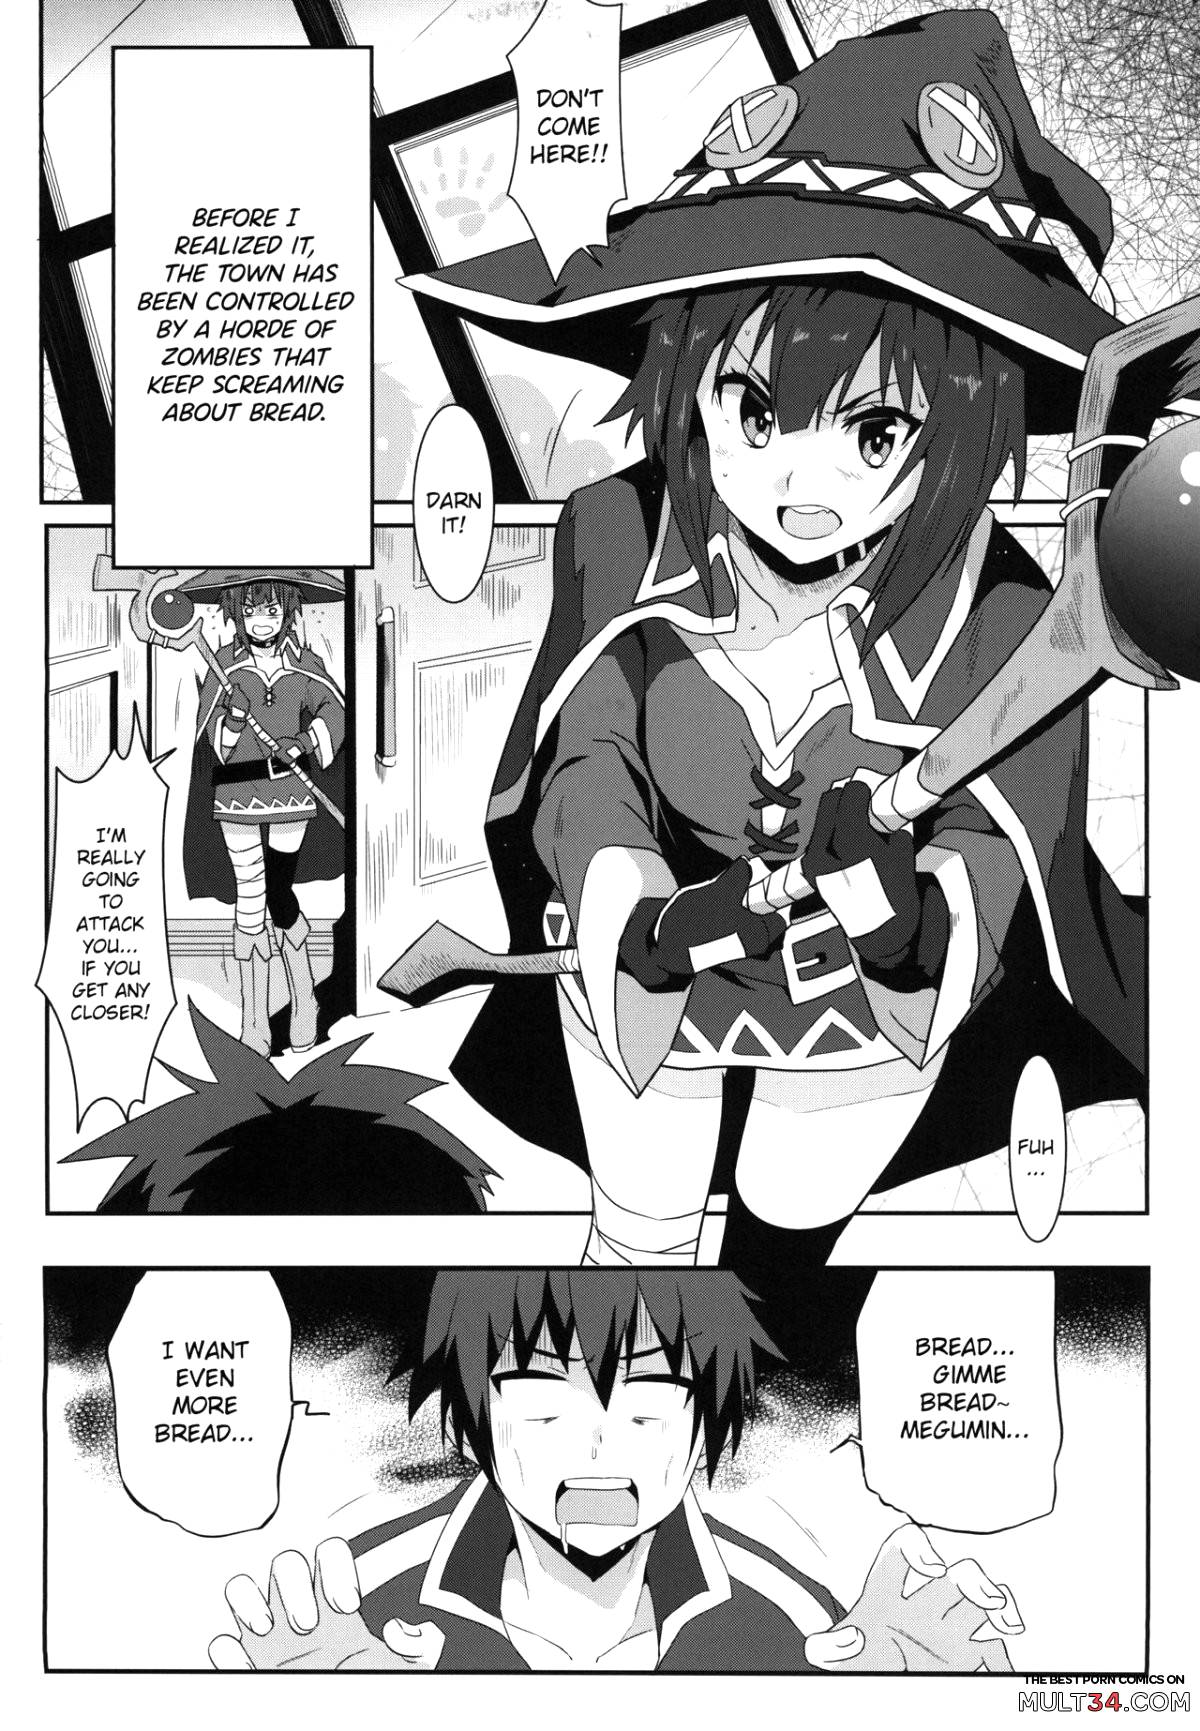 Blessing Megumin with a Magnificence Explosion! 4 page 3